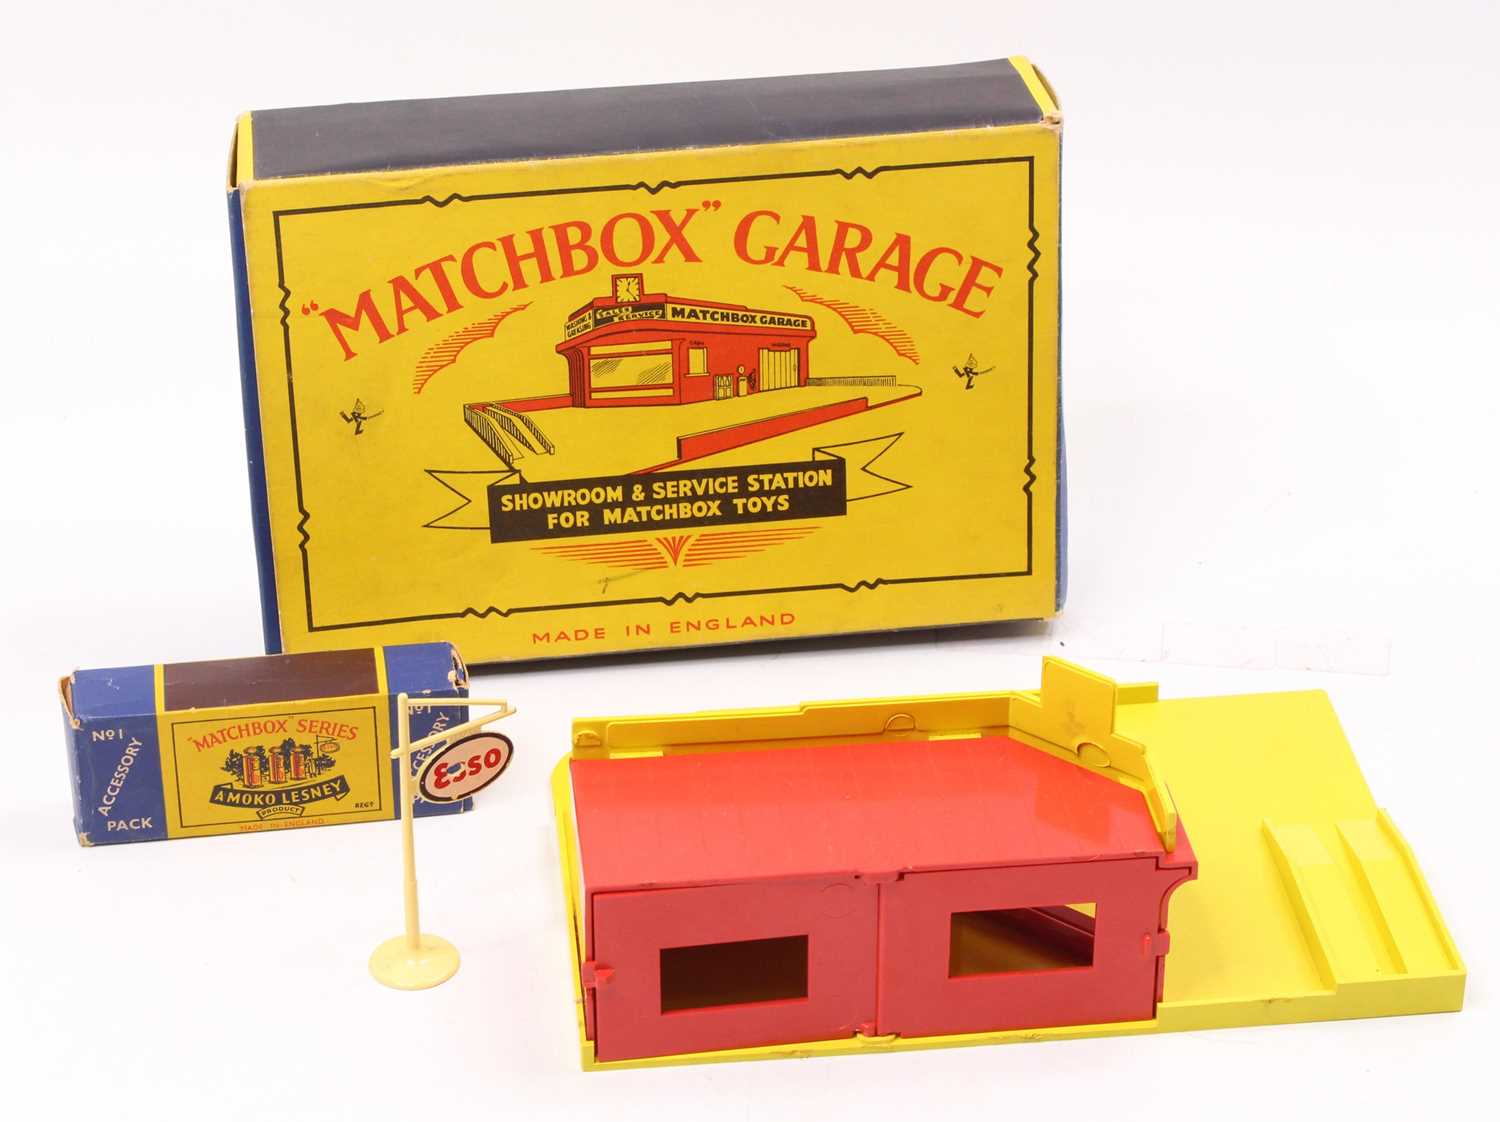 A Matchbox Lesney MG1 Garage, Showroom & Service Station for Matchbox Toys comprising a yellow and - Image 2 of 2